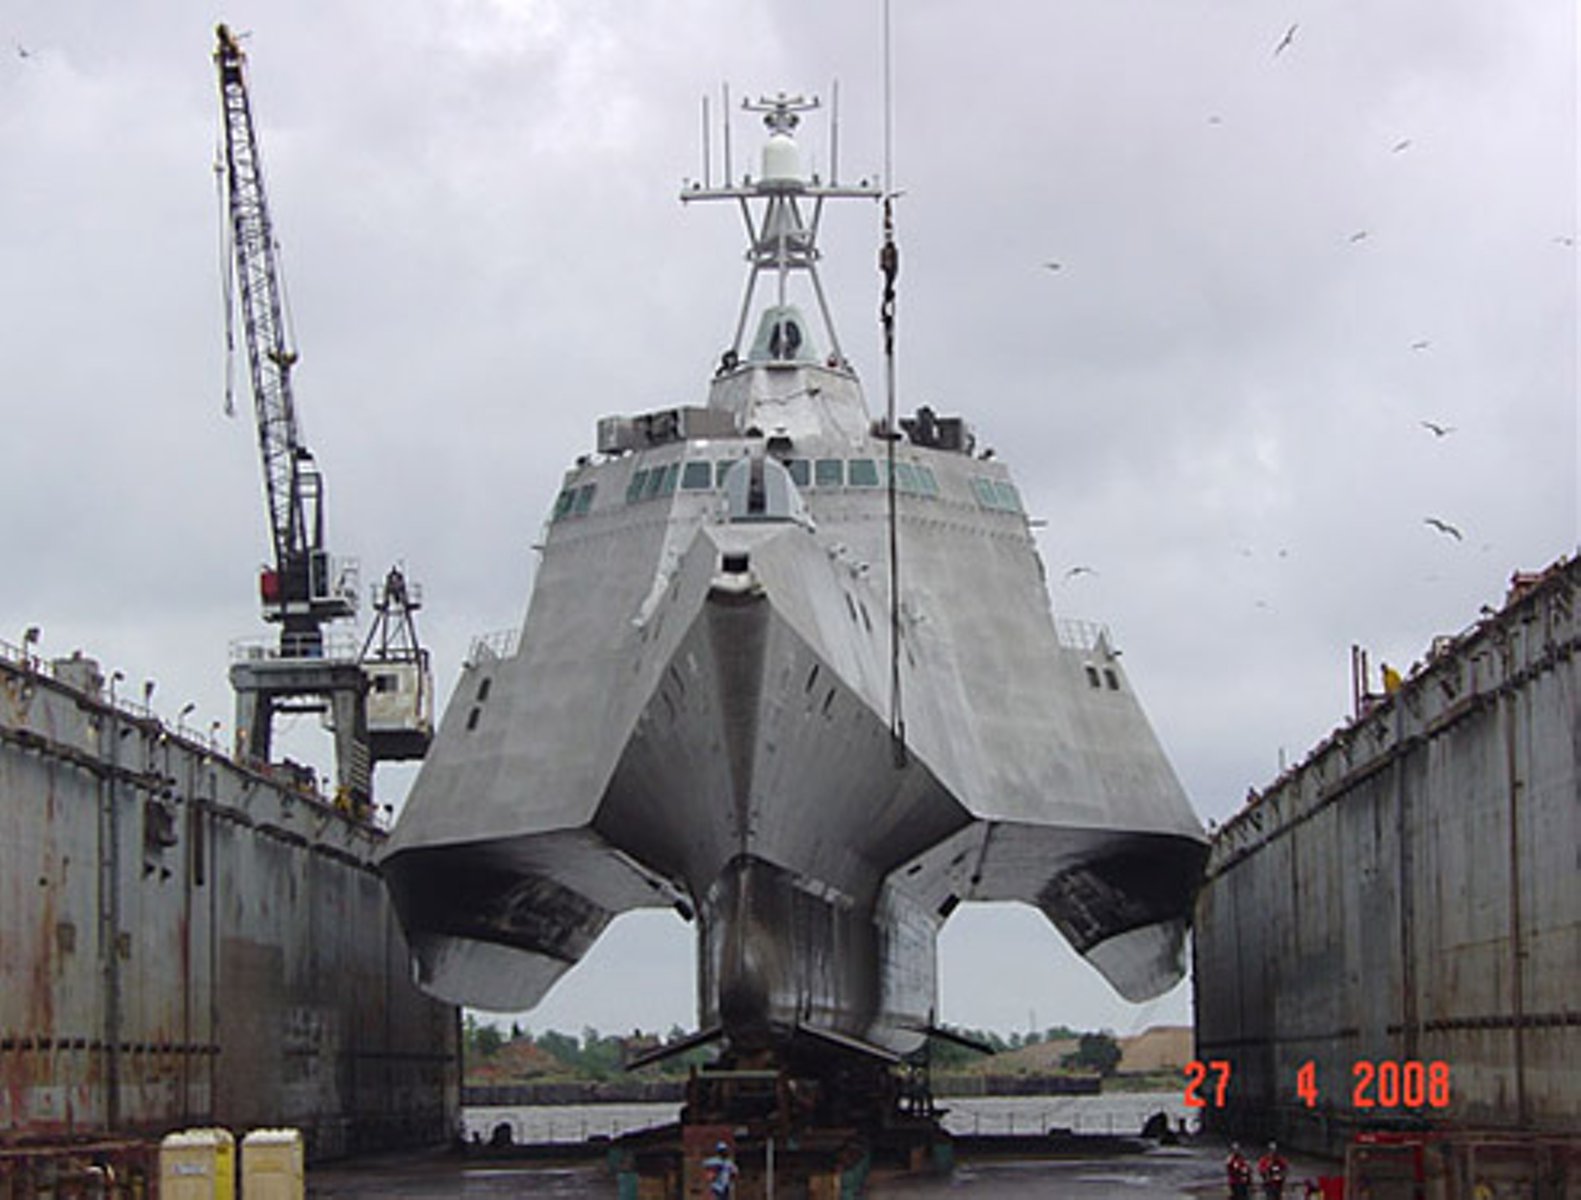 http://einarbb.blog.is/users/72/einarbb/img/uss_independence_3.jpg